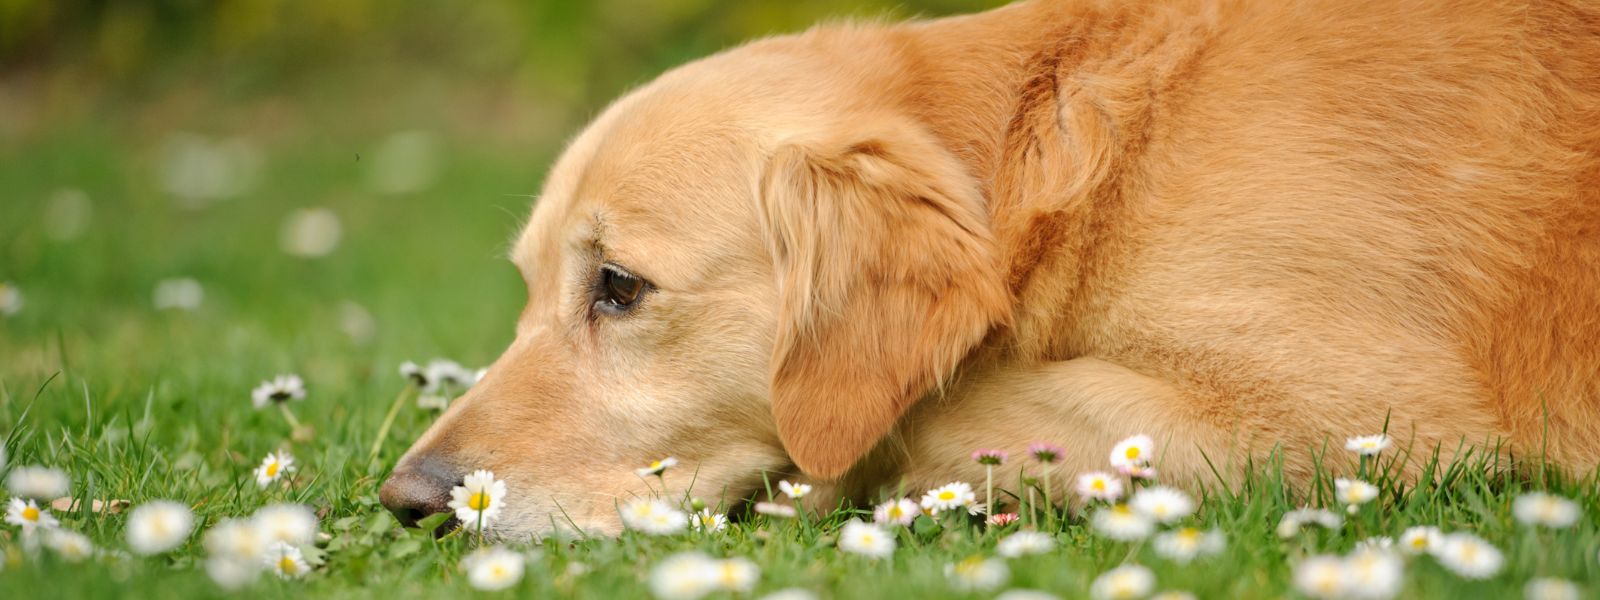 How to relieve constipation in dogs